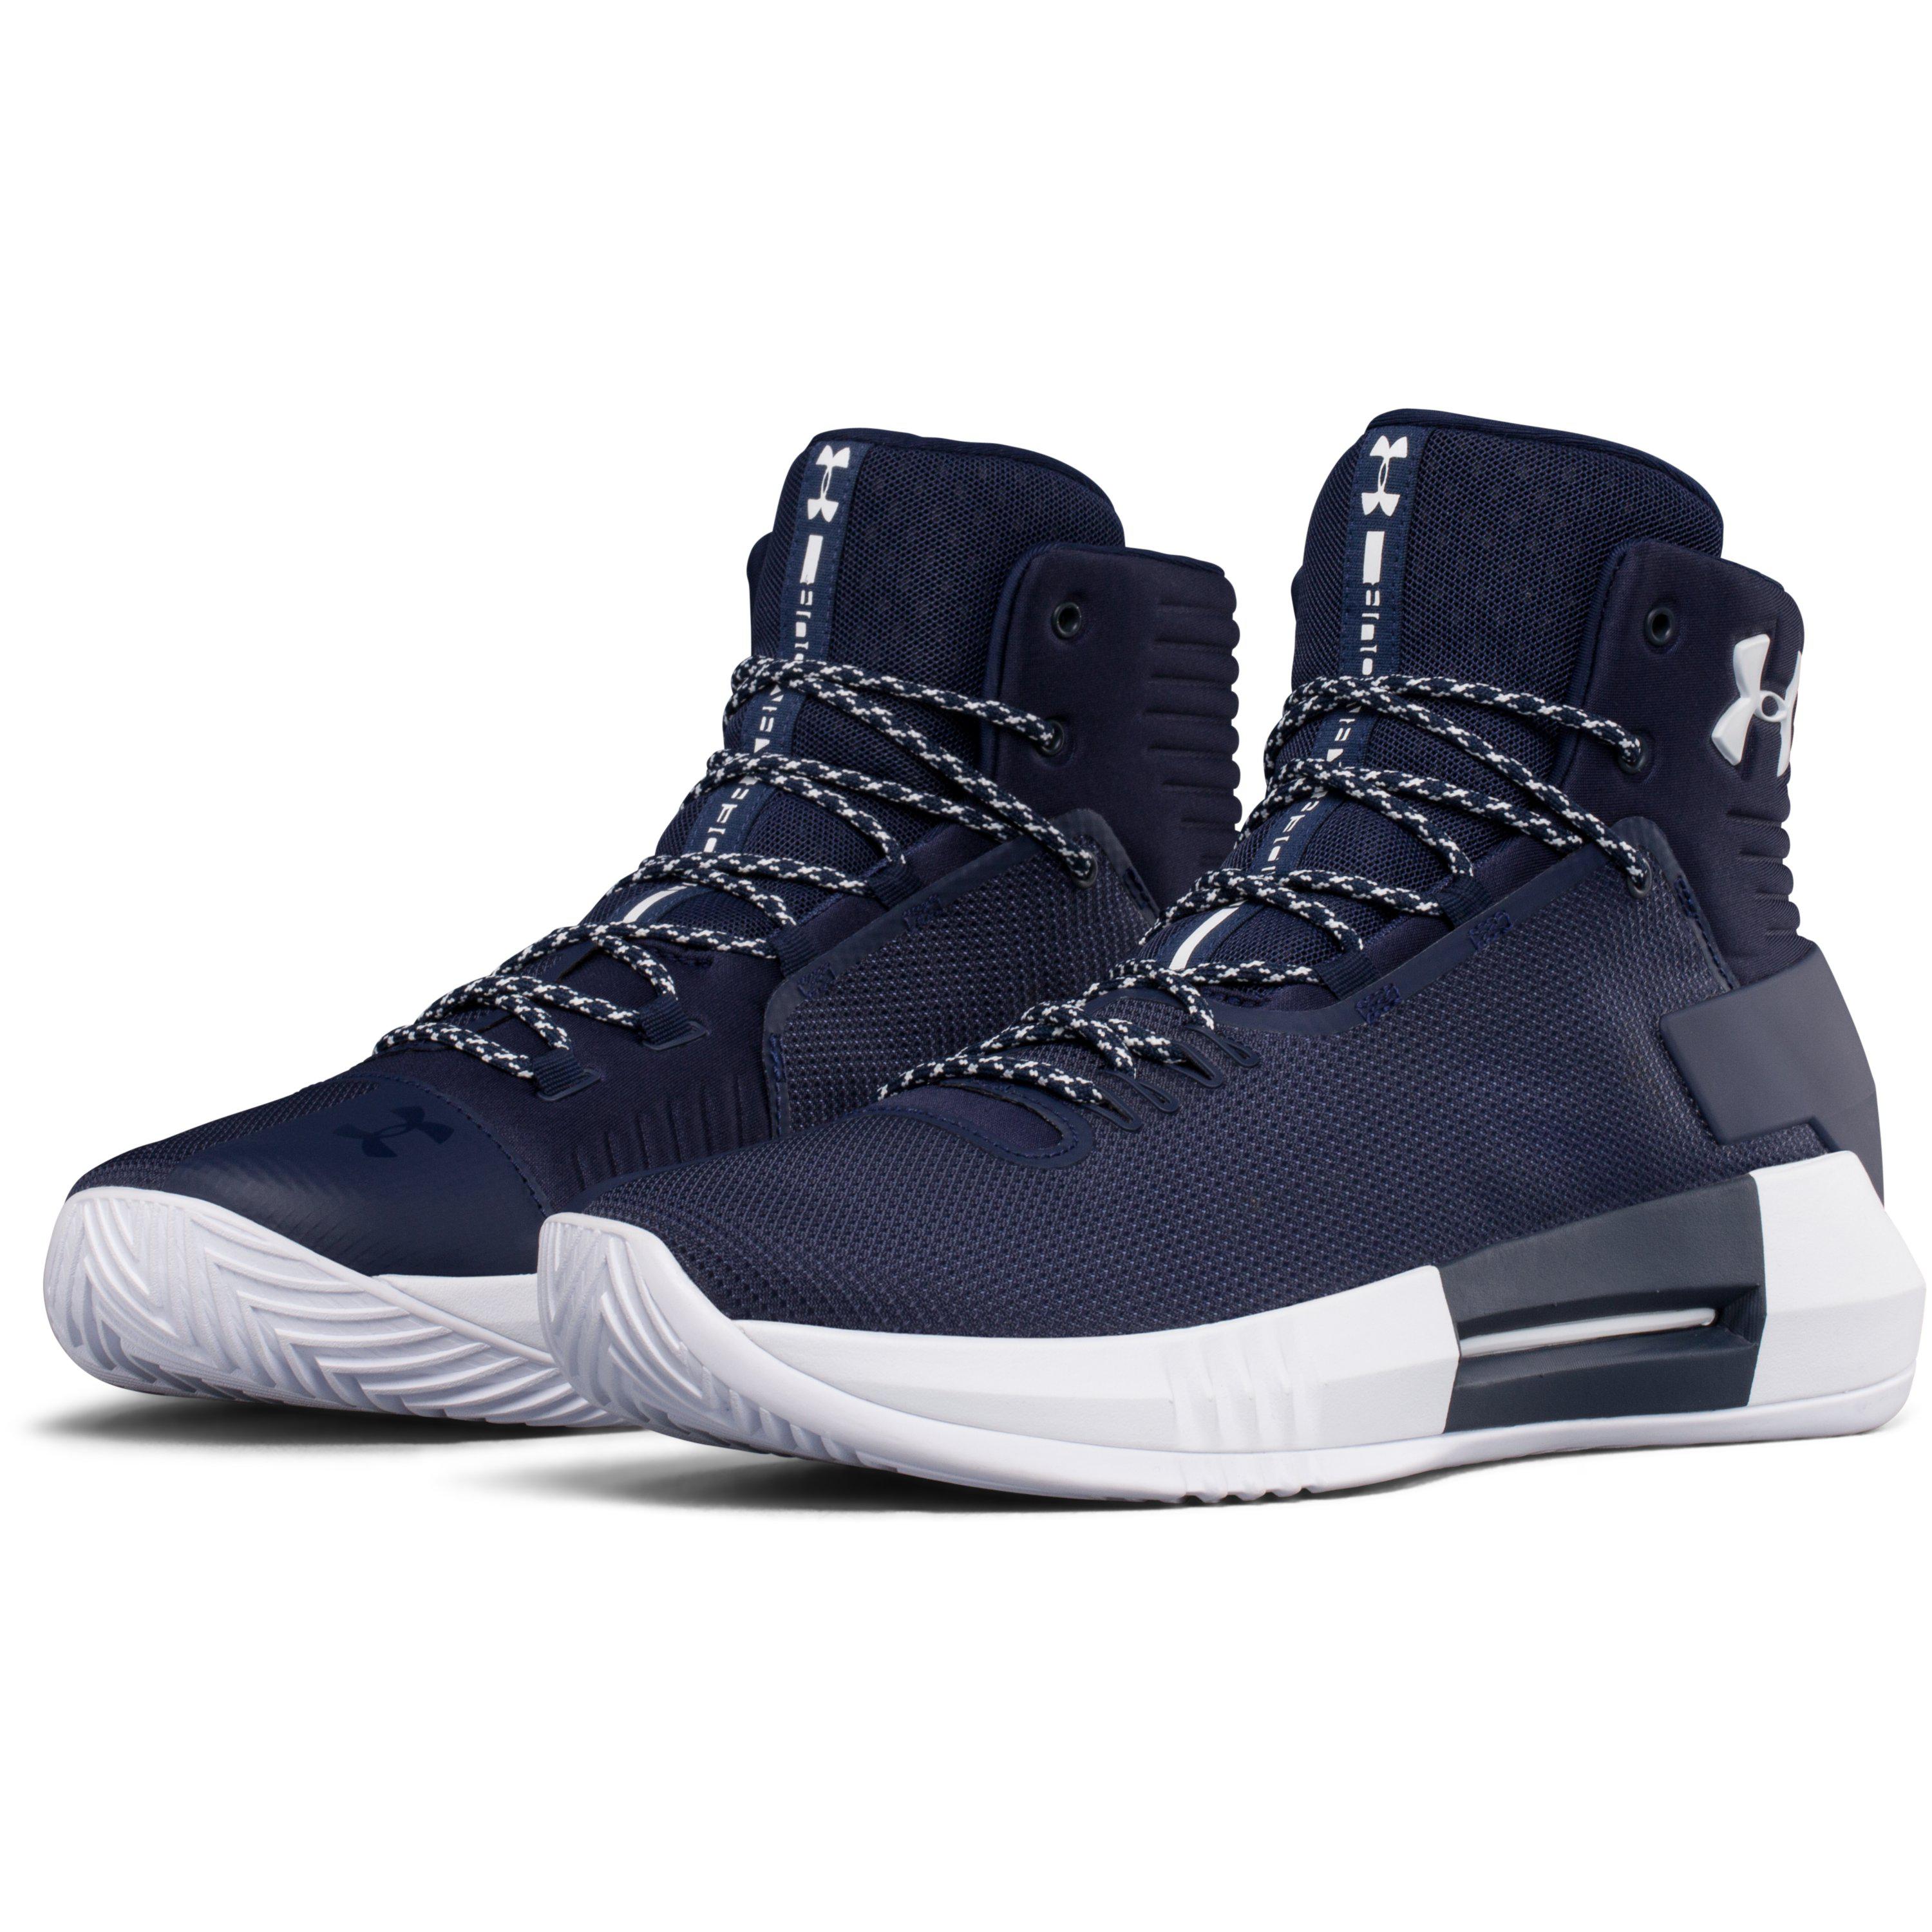 BRAND NEW Under Armour Men's Drive 4 Basketball Shoes 1303010 